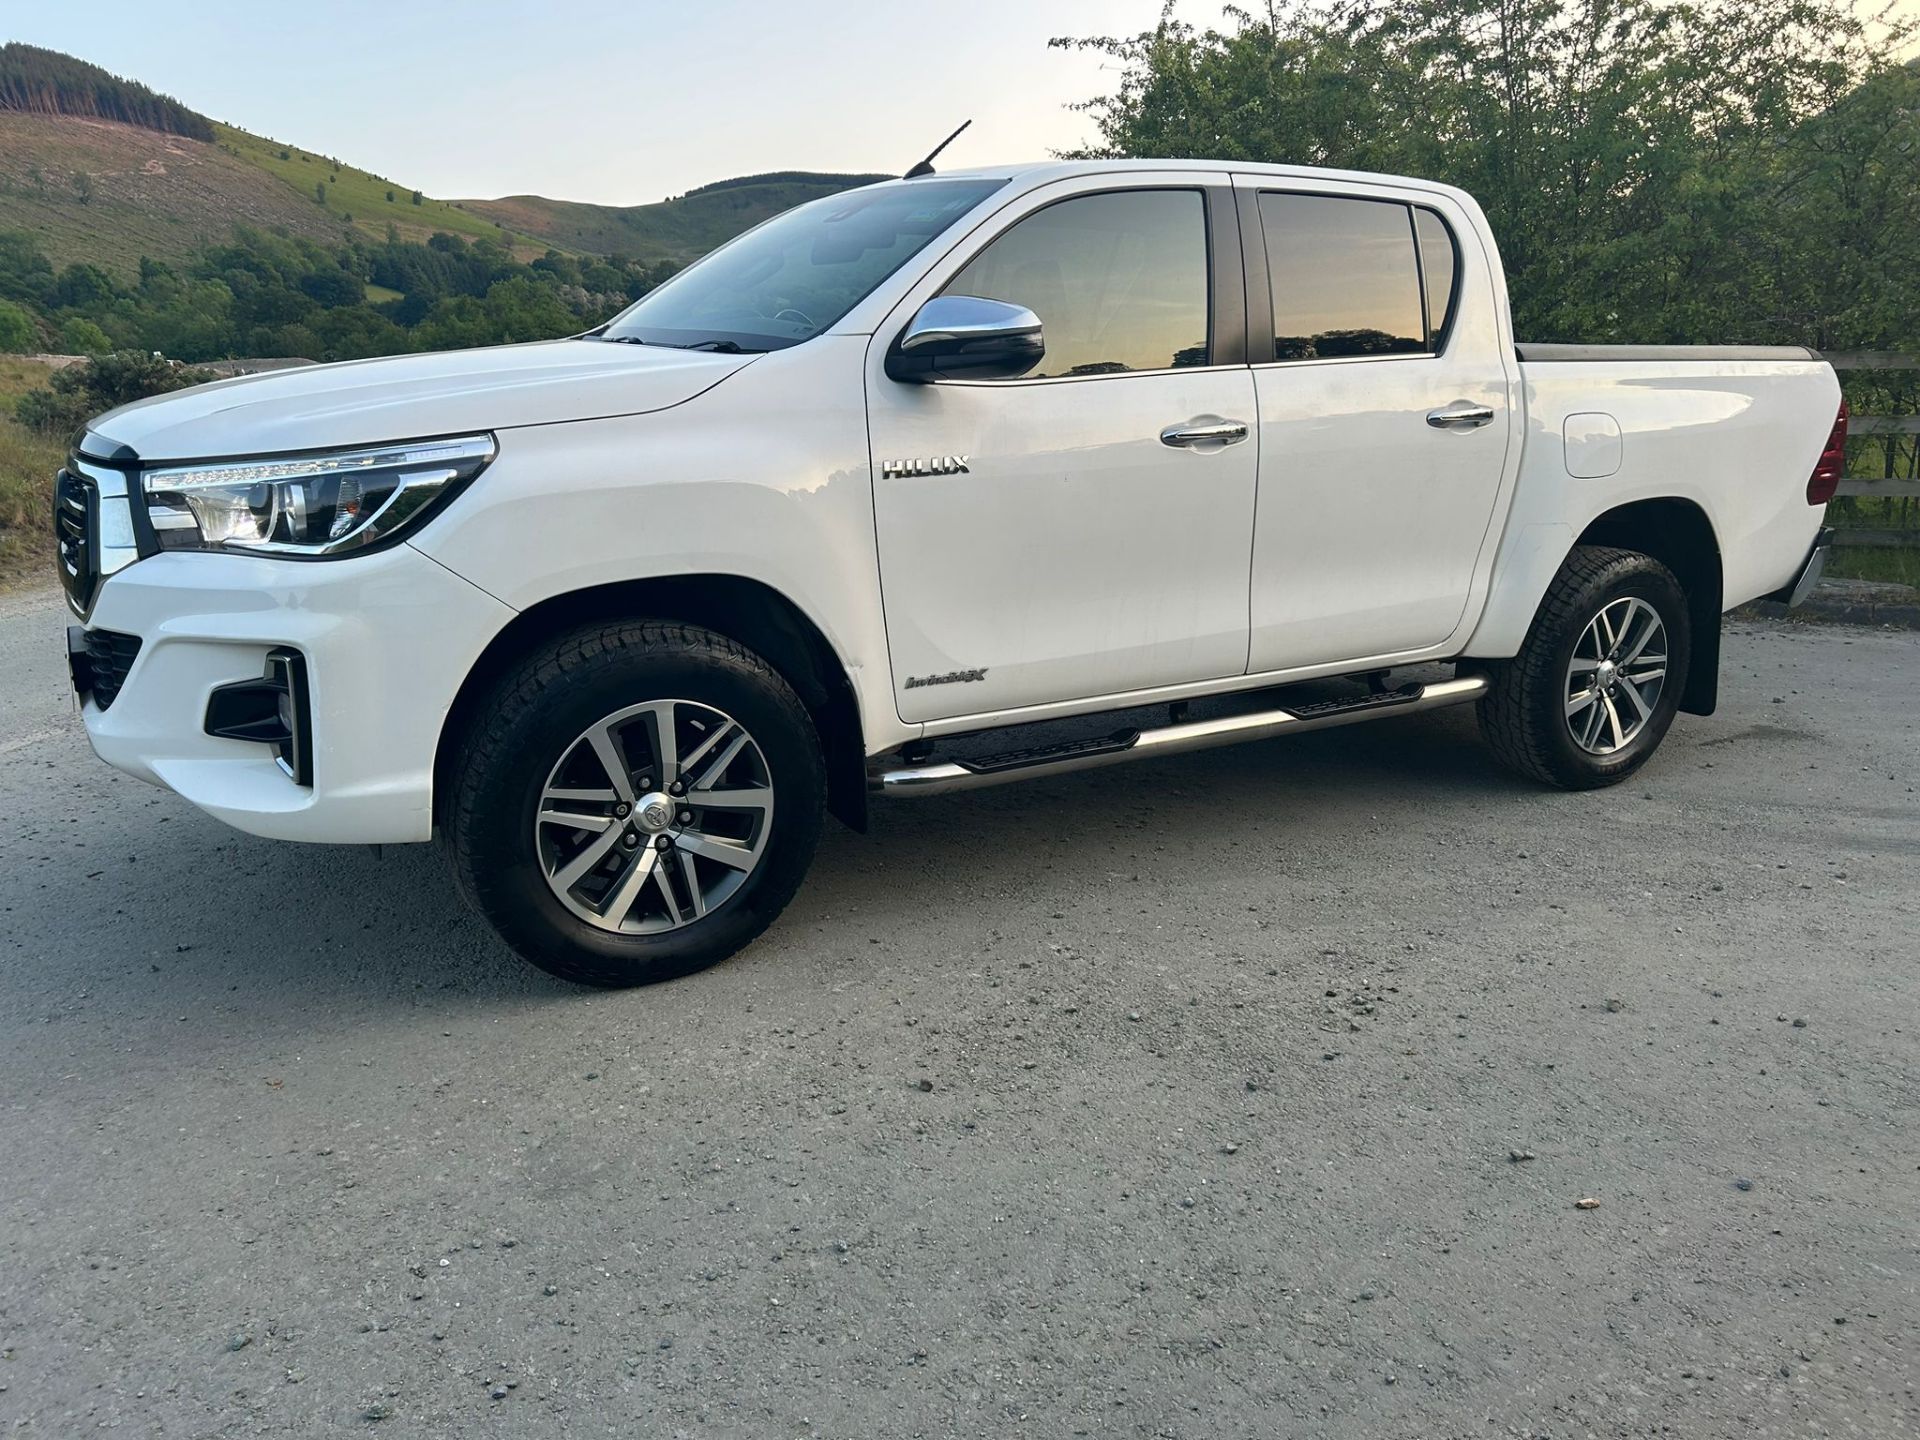 AUTOMATIC 2018 TOYOTA HILUX LIMITED EDITION FACELIFT ROLLER SHUTTER - Image 4 of 18